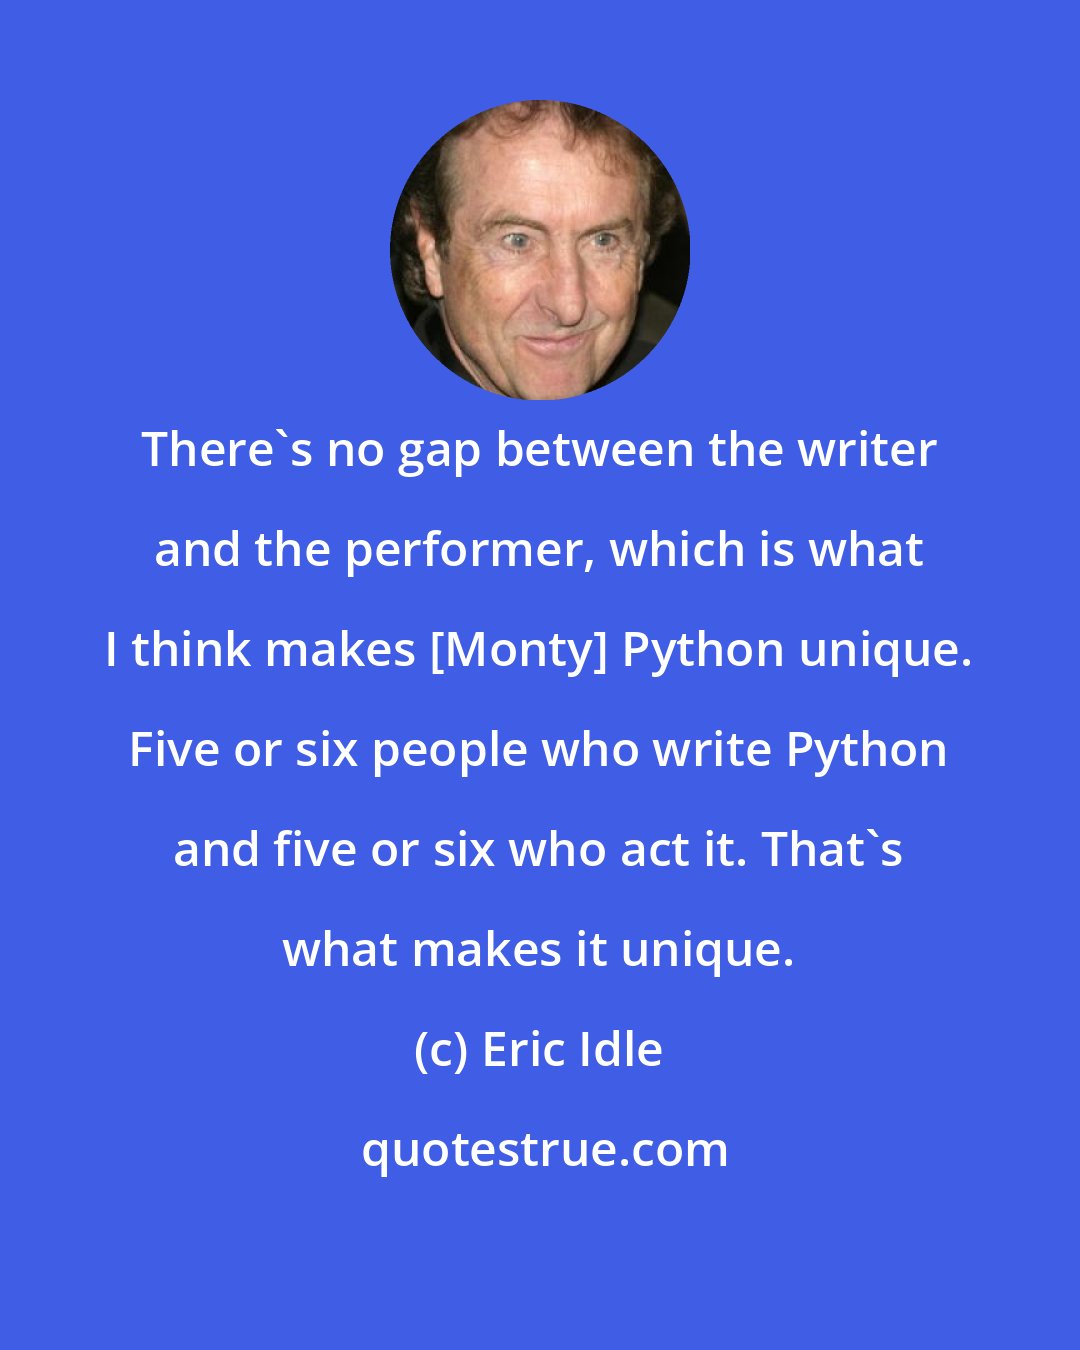 Eric Idle: There's no gap between the writer and the performer, which is what I think makes [Monty] Python unique. Five or six people who write Python and five or six who act it. That's what makes it unique.